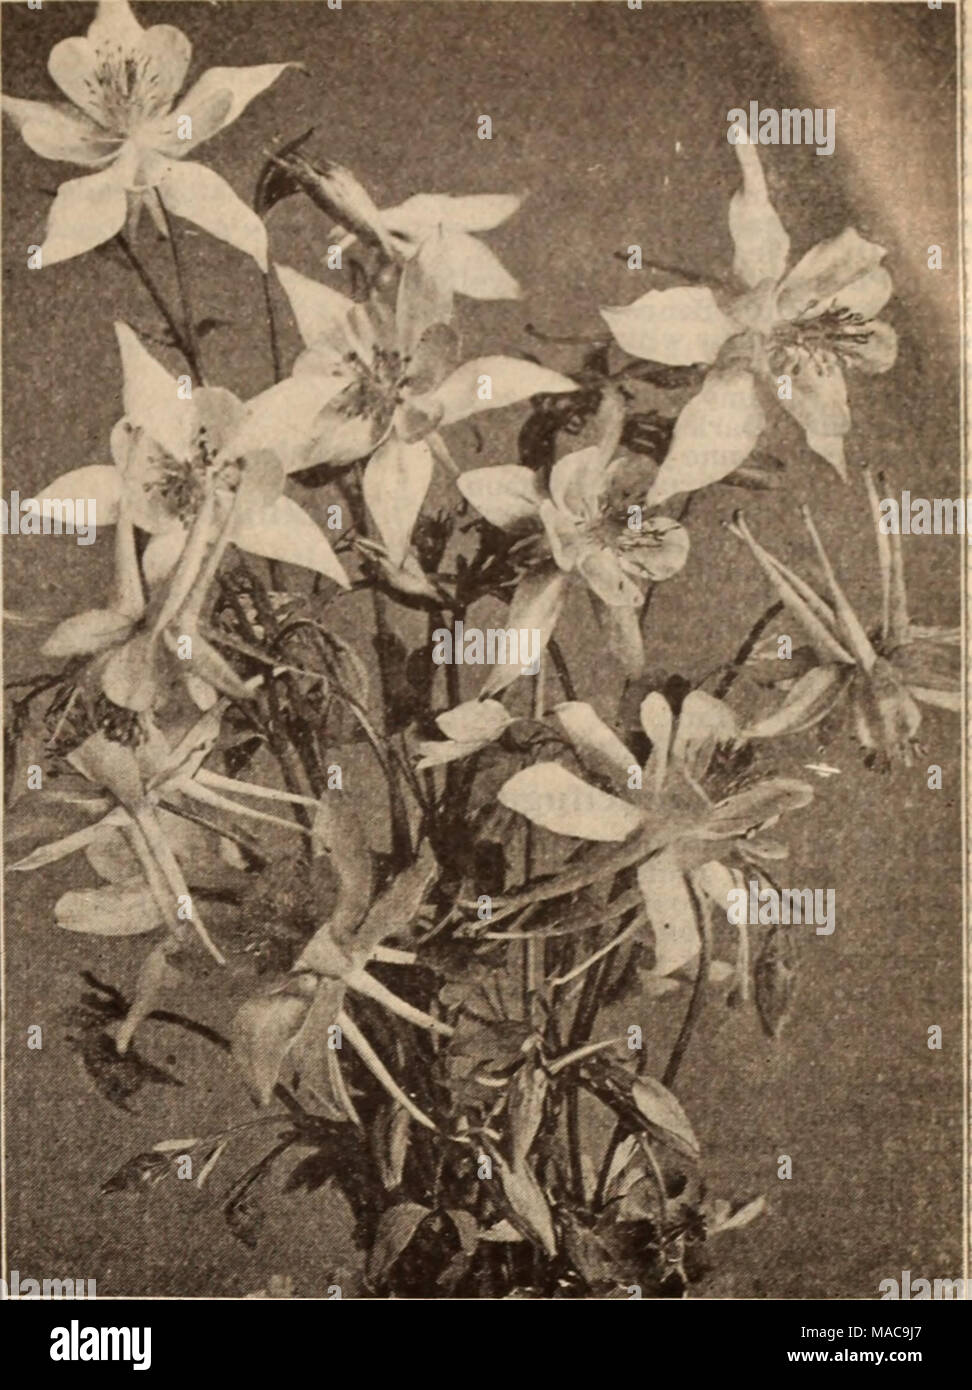 . Dreer's wholesale price list / Henry A. Dreer. . I AQUILEGIA, OR COLUMBINES, ofifercd CD page 24 Bocconia (Plume Poppy). Per doz. Per 100 Cordata. Strong divisions $085 $600 Boltonia (False Chamomile). Asteroides. S'/i-inch pots 85 6 OO Latisquama. 3'/4-inch pots 85 6 0O Nana. 3'/2-inch pots 80 6 OO Campanula (Bell-flower). Alliarlaefolia. 3-inch pots 100 7 0O Carpatlca. Blue. 3-inch pots 100 7 00 White. 3-inch pots 1 00 7 00 Grosseki. 3-inch pots 100 7 0O Latifolia Macrantha. 3-inch pots 100 7 0O Medium (Canterbury Bellj. Blue, white and rose. 4-inch pots .... 100 7 0O Persicifolia. Blue an Stock Photo